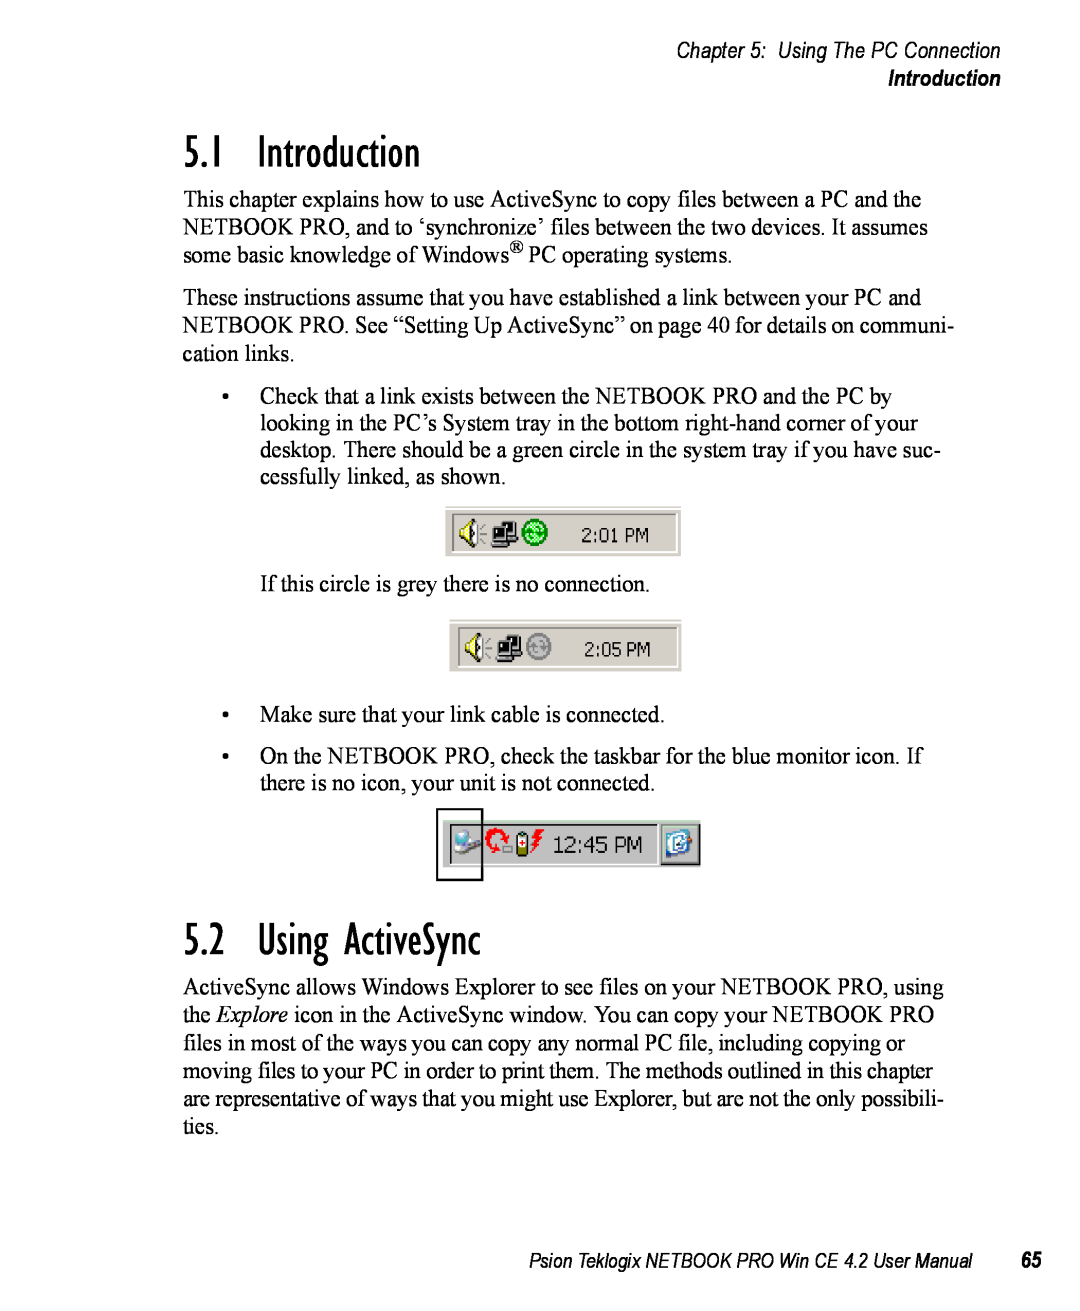 Psion Teklogix Win CE 4.2 user manual Introduction, Using ActiveSync, Using The PC Connection 